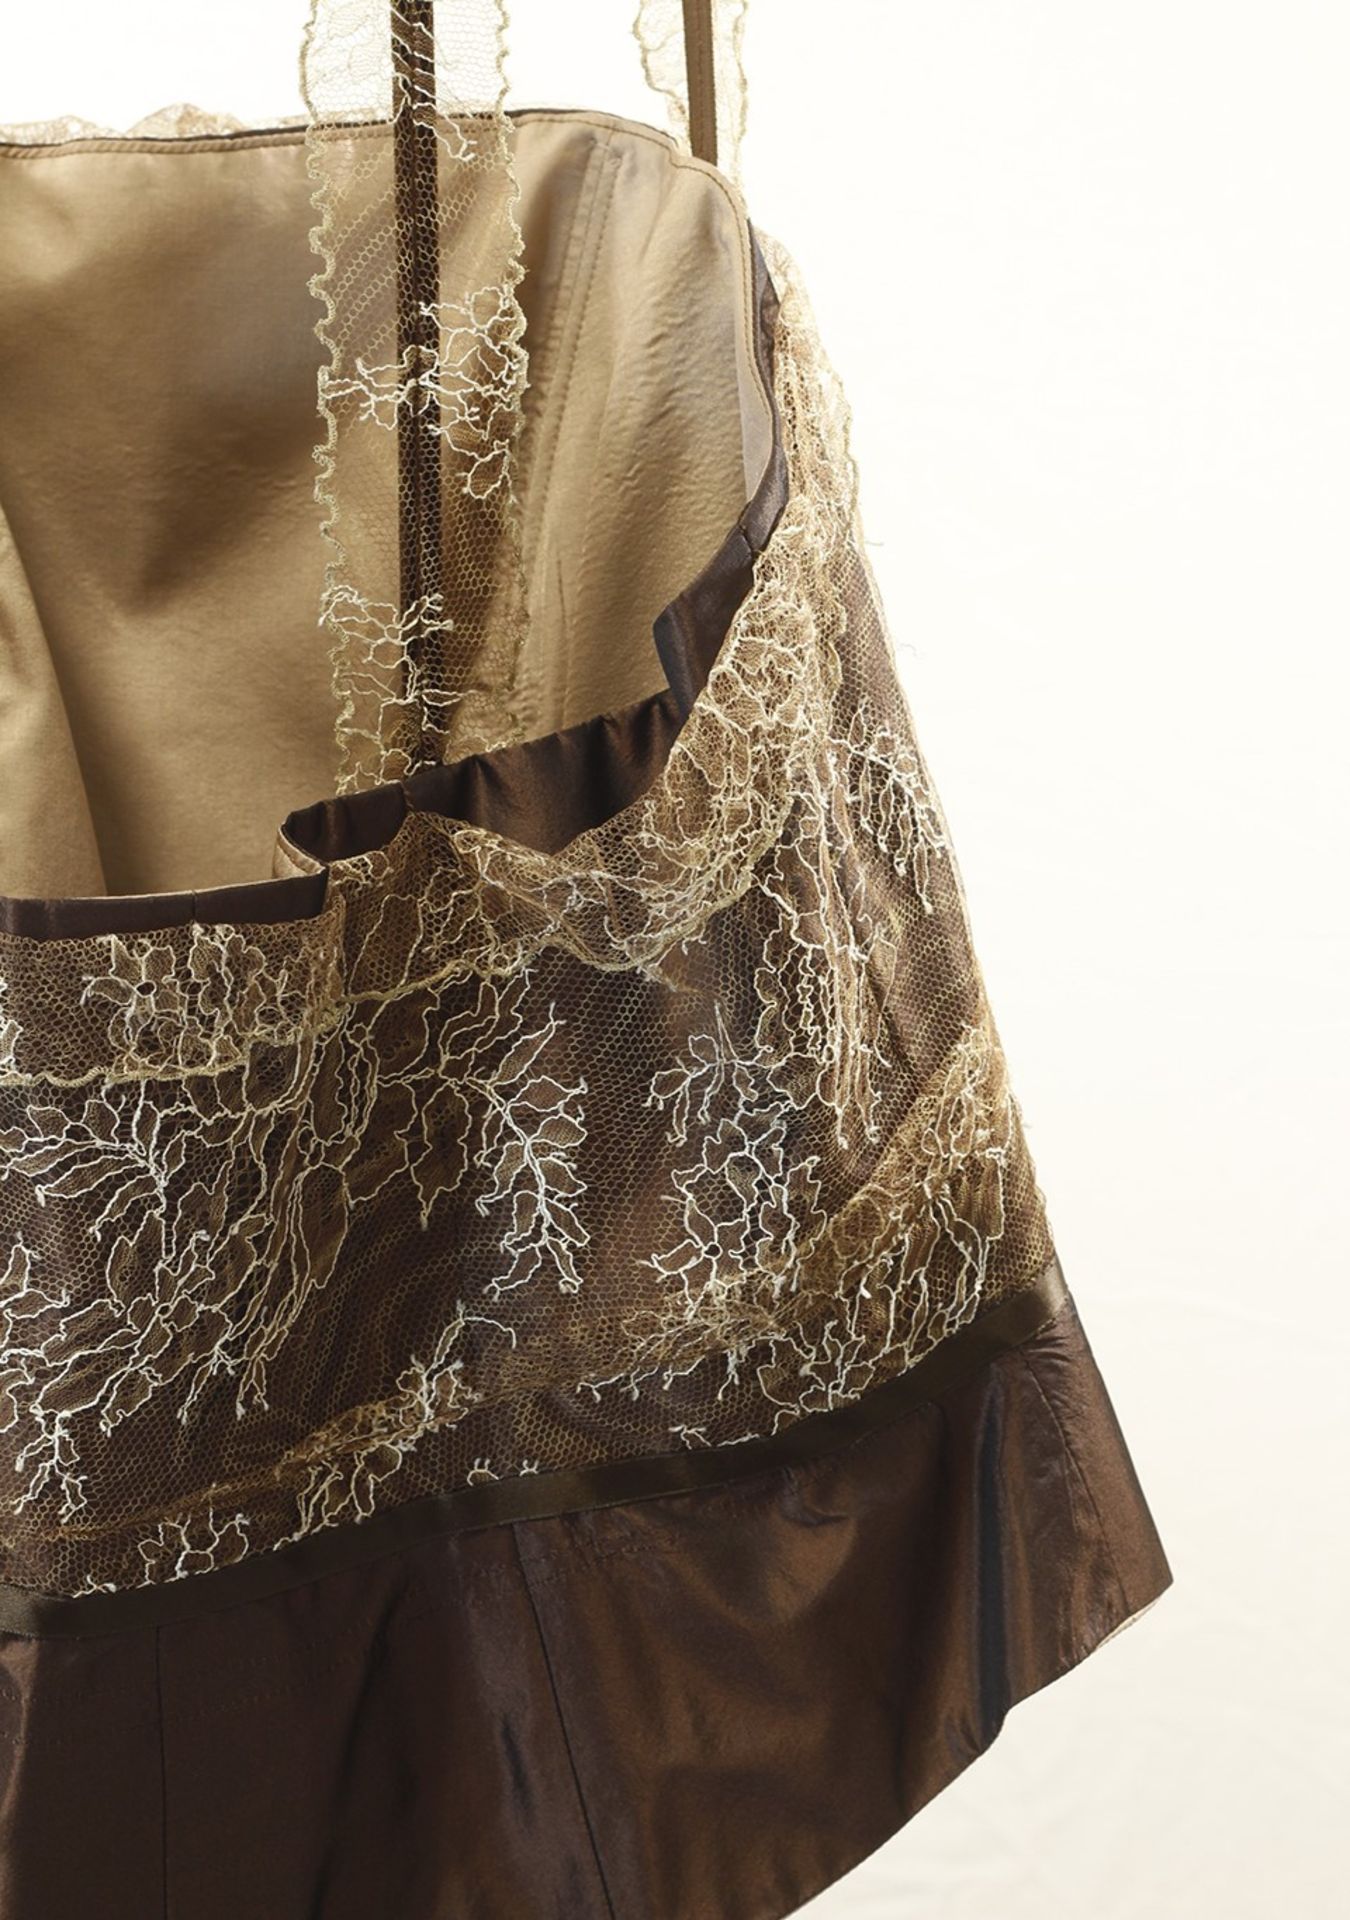 1 x Anne Belin Brown Halterneck - Size: 20 - Material: 100% Silk - From a High End Clothing Boutique - Image 2 of 6